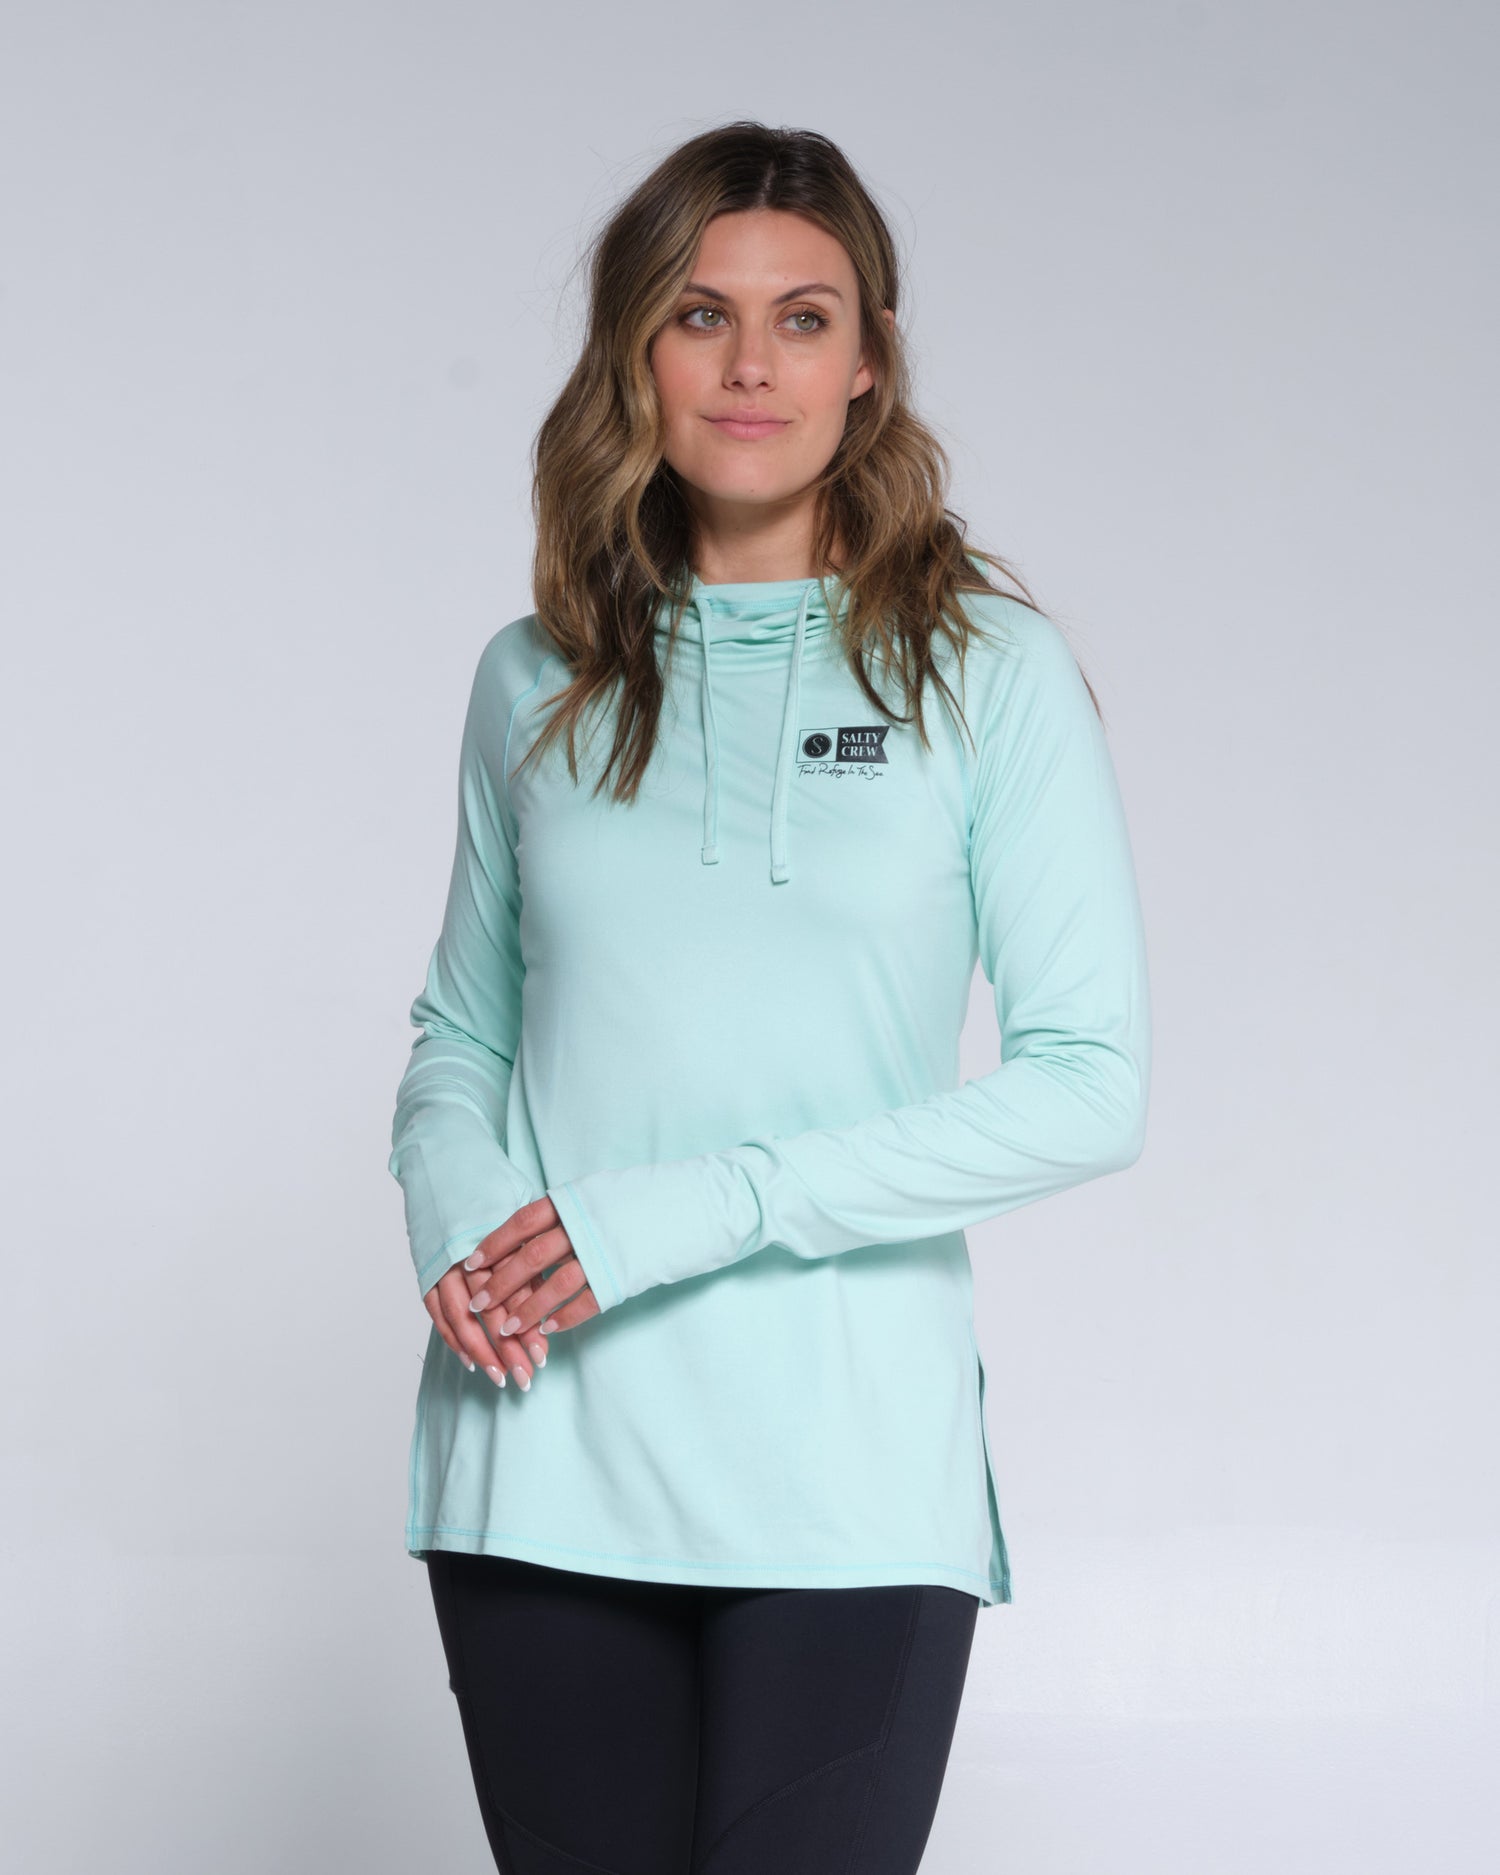 On body front of the Thrill Seekers Sea Foam Hooded Sunshirt